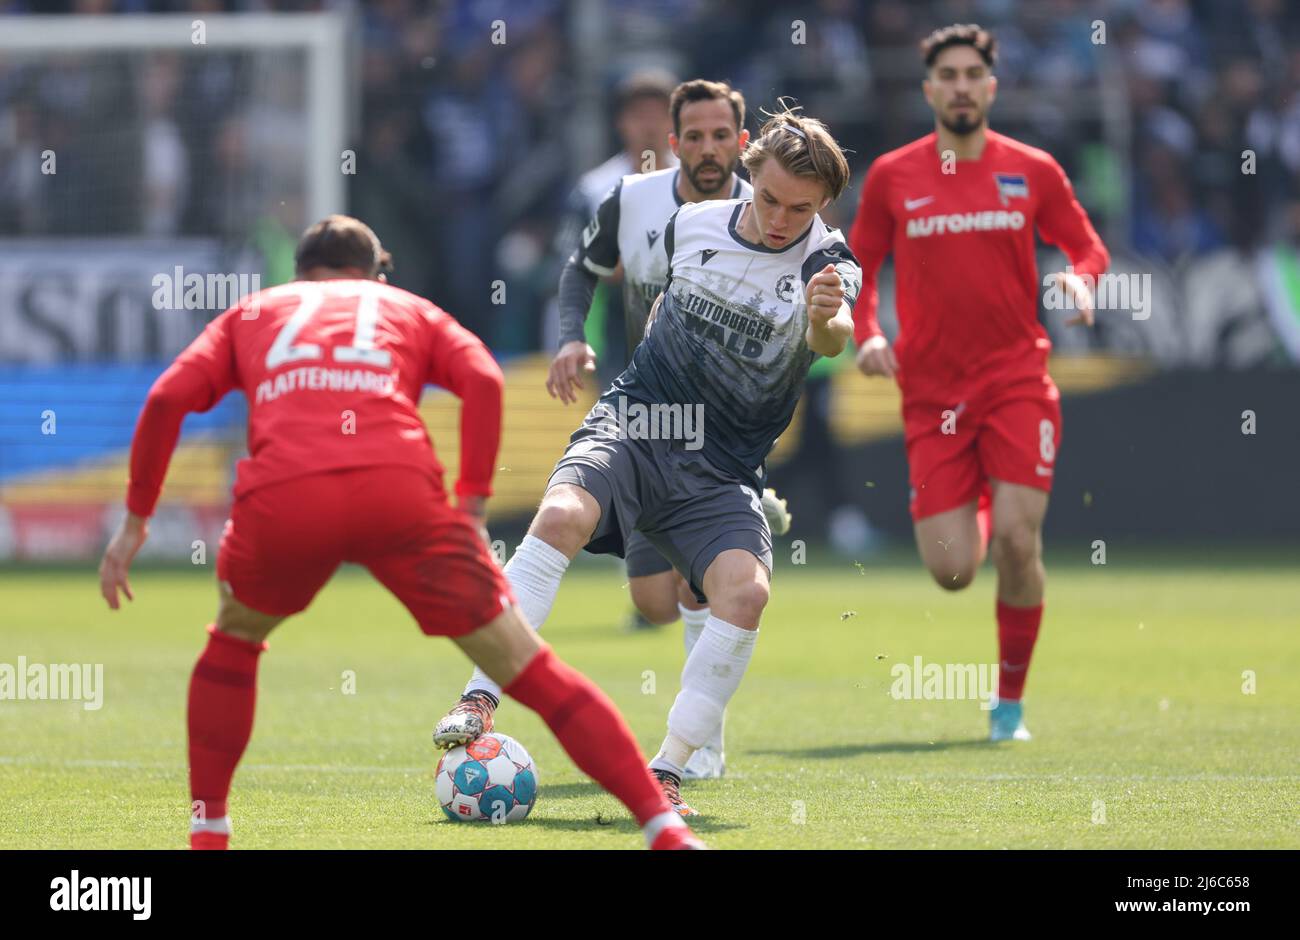 Germany. 30th Apr, 2022. 30 April 2022, North Rhine-Westphalia, Bielefeld: Soccer: Bundesliga, Arminia Bielefeld - Hertha BSC, Matchday 32 at Schüco Arena. Bielefeld's Patrick Wimmer (center) battles for the ball with Berlin's Marvin Plattenhardt (left). Photo: Friso Gentsch/dpa - IMPORTANT NOTE: In accordance with the requirements of the DFL Deutsche Fußball Liga and the DFB Deutscher Fußball-Bund, it is prohibited to use or have used photographs taken in the stadium and/or of the match in the form of sequence pictures and/or video-like photo series. Credit: dpa picture alliance/Alamy Live Ne Stock Photo